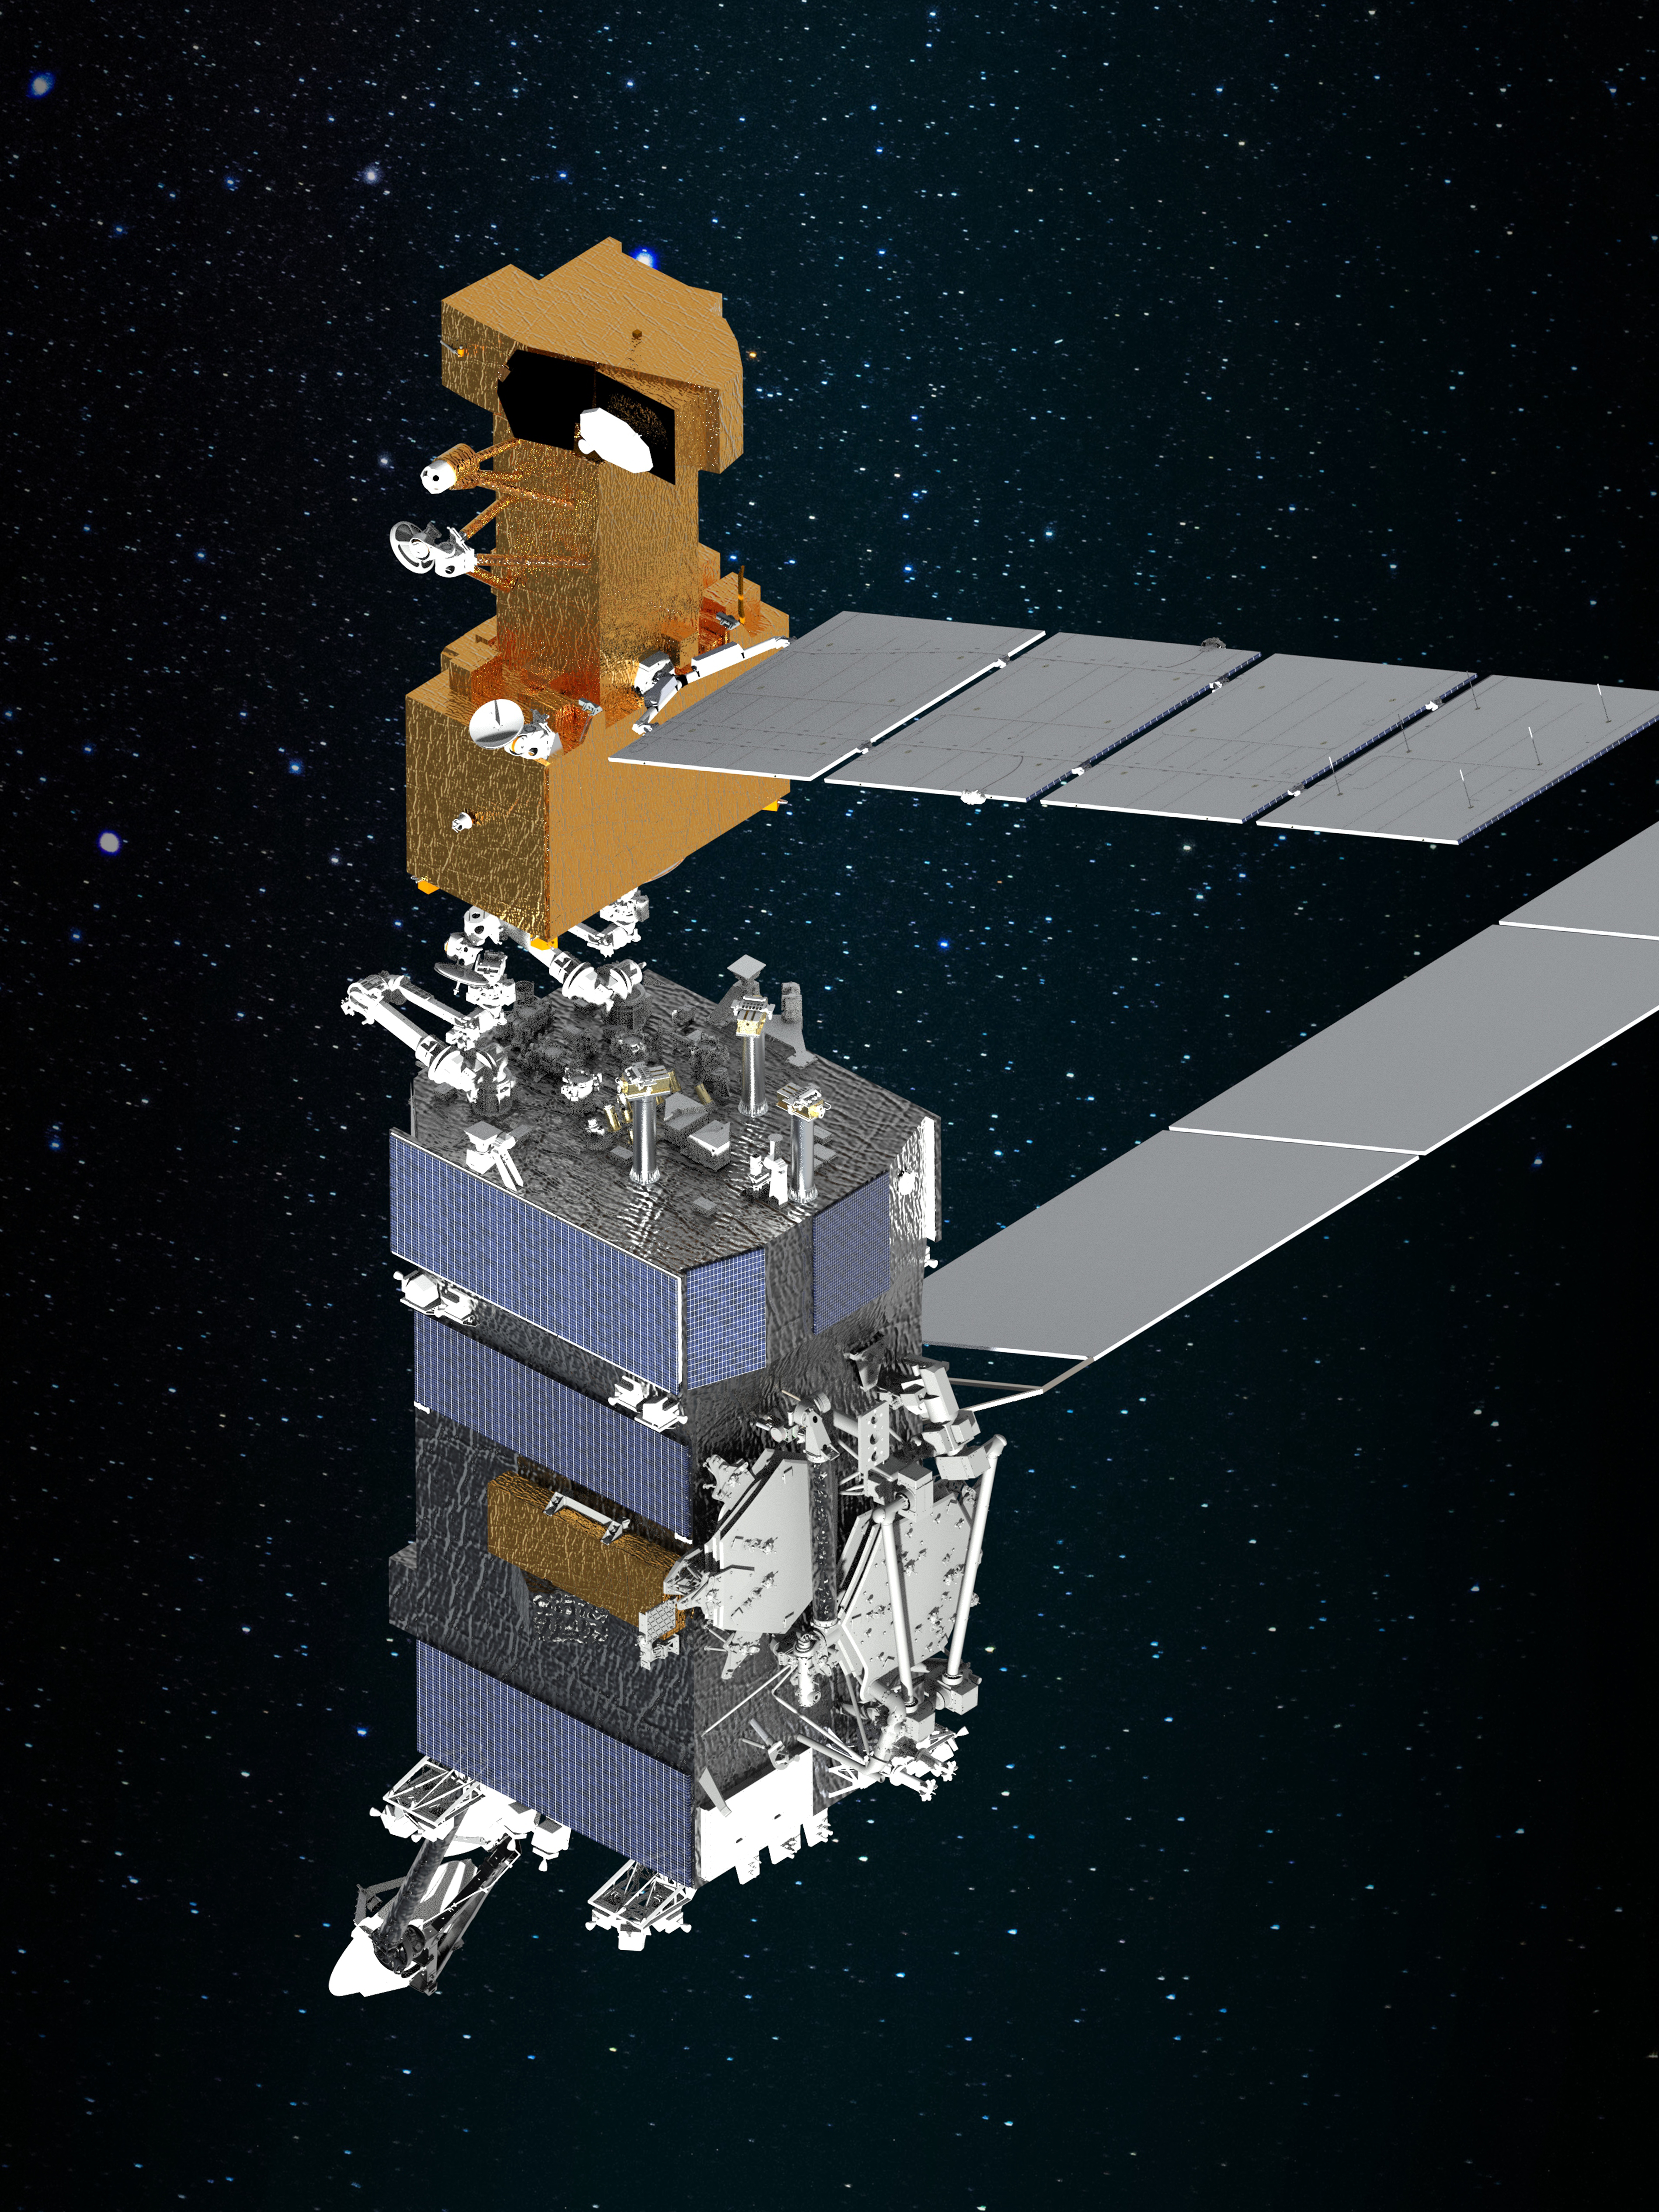 On-orbit Servicing, Assembly, and Manufacturing 1 (OSAM-1) - NASA